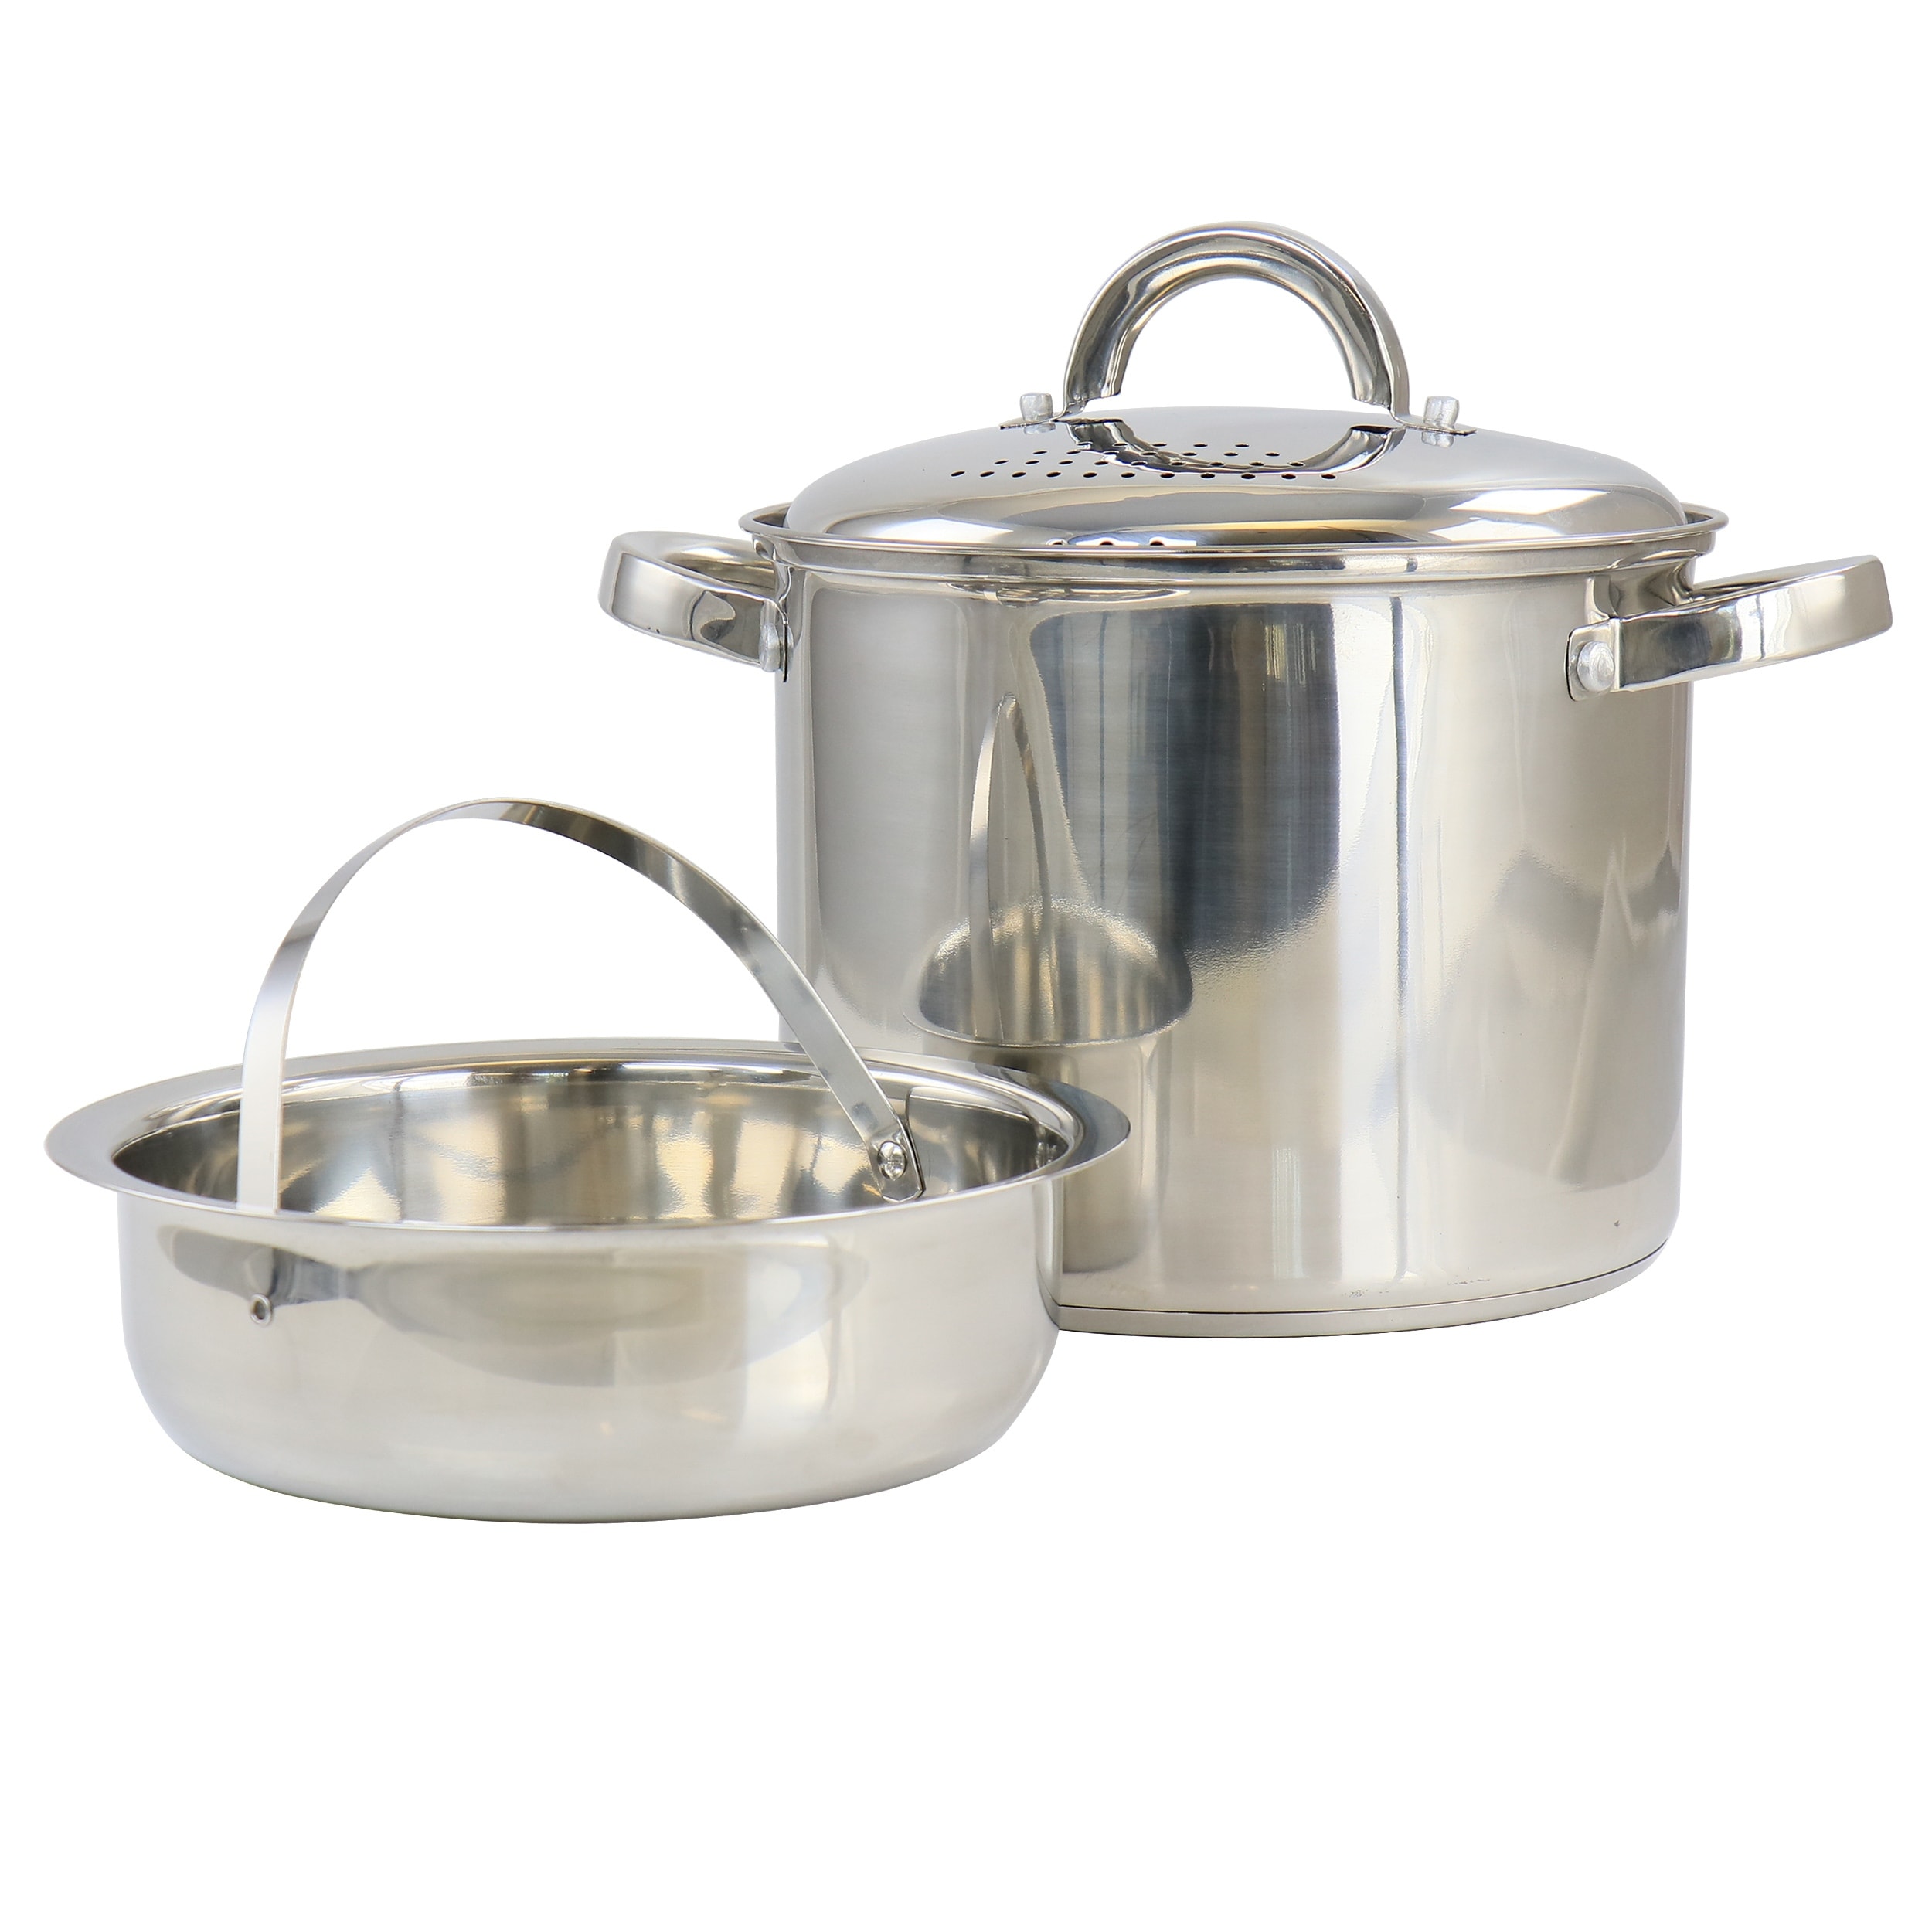 https://ak1.ostkcdn.com/images/products/is/images/direct/1fb34e9c310a2f3bc04380186aeb66bf68e1cfdd/Oster-Sangerfield-5Qt-Pasta-Pot-with-Strainer-Lid-and-Steamer.jpg